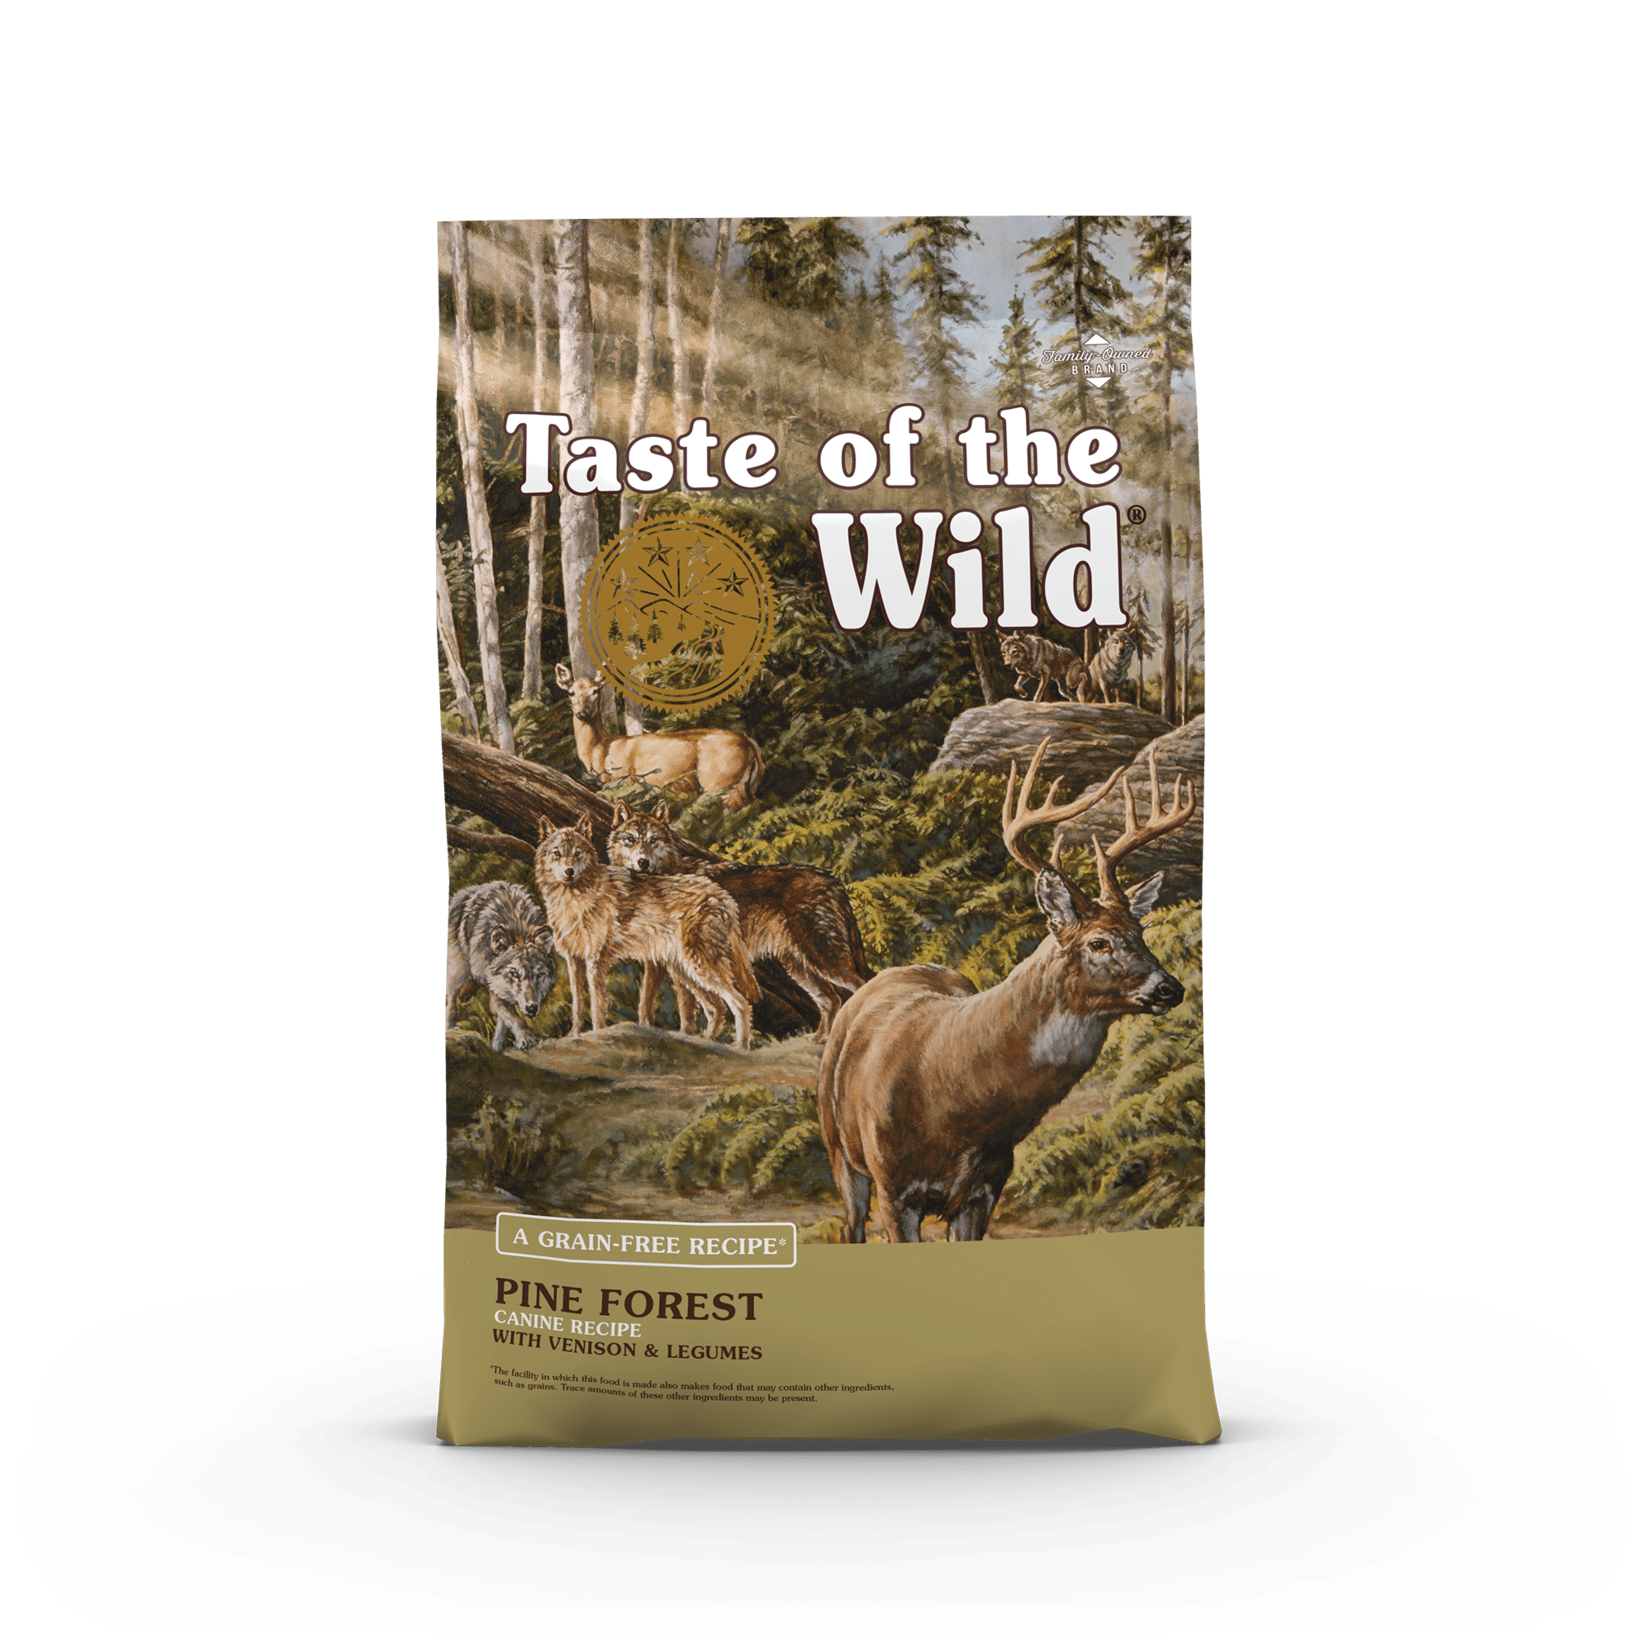 Taste of the Wild Taste of the Wild Dry Dog Food Pine Forest Venison Recipe with Venison & Legumes Grain Free